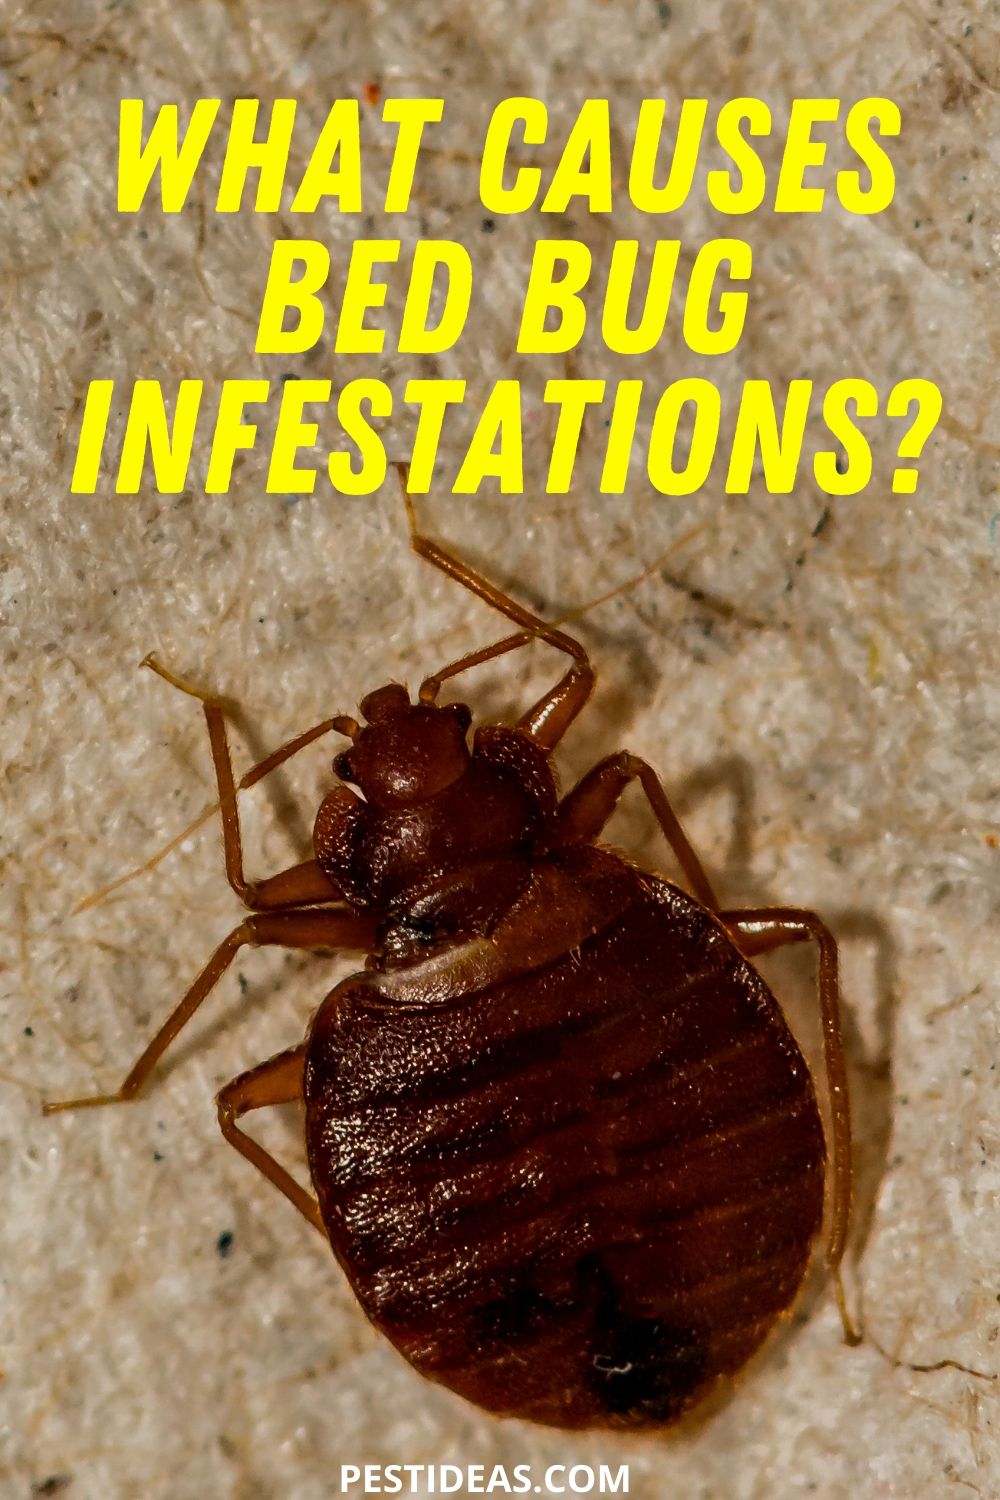 What Attracts Bed Bugs Into Your Home? Learn More